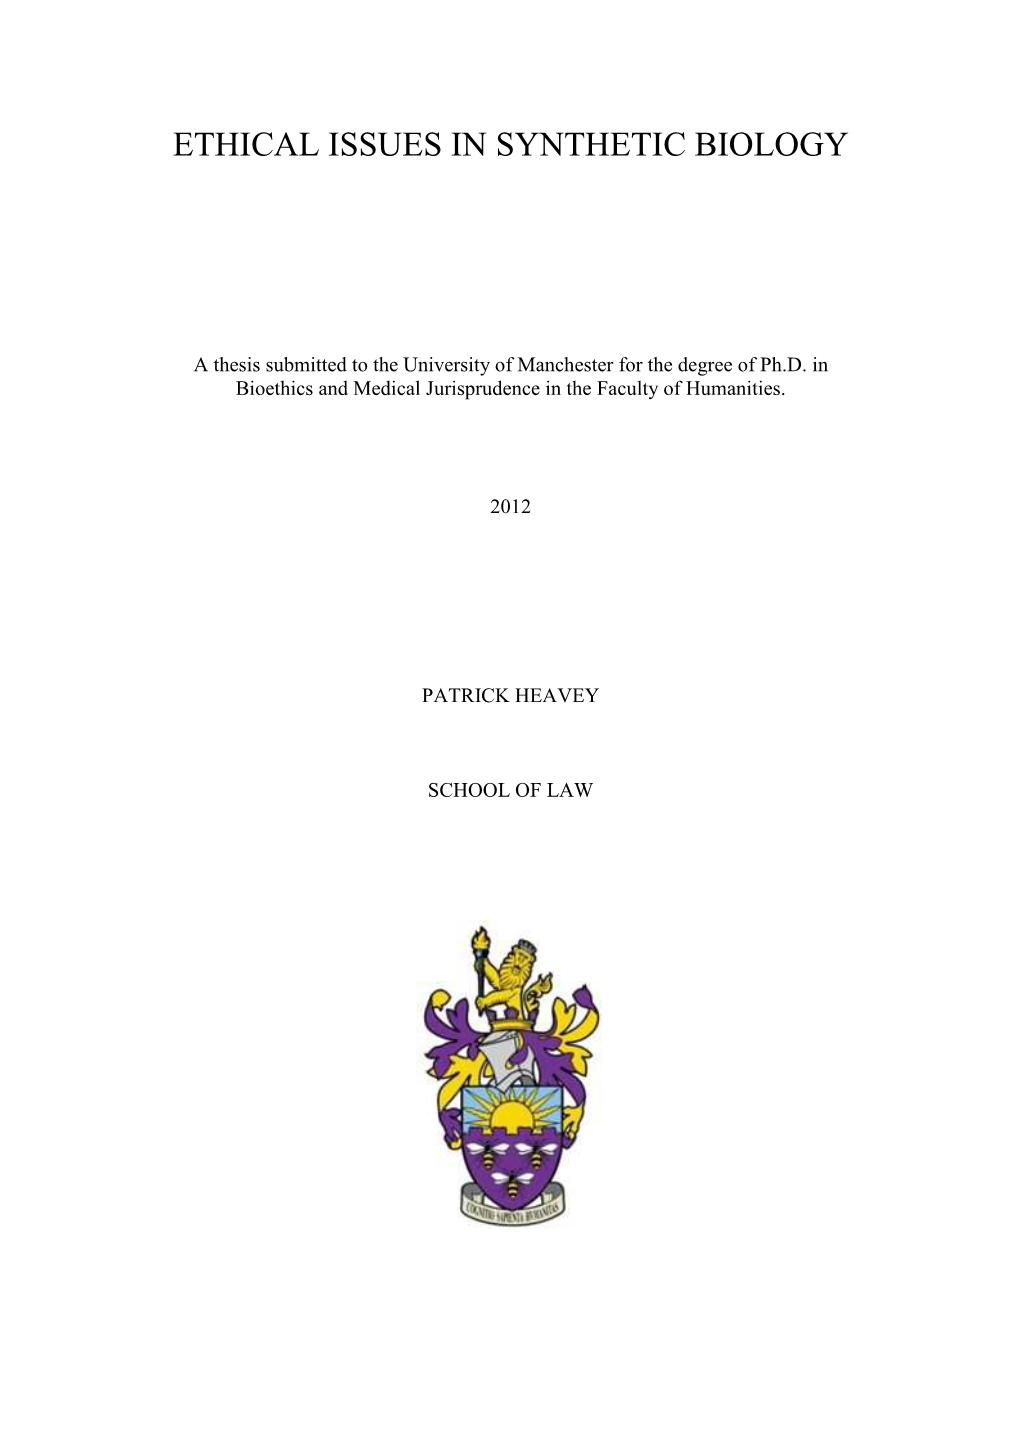 Phd Thesis, School of Law, University of Manchester, P